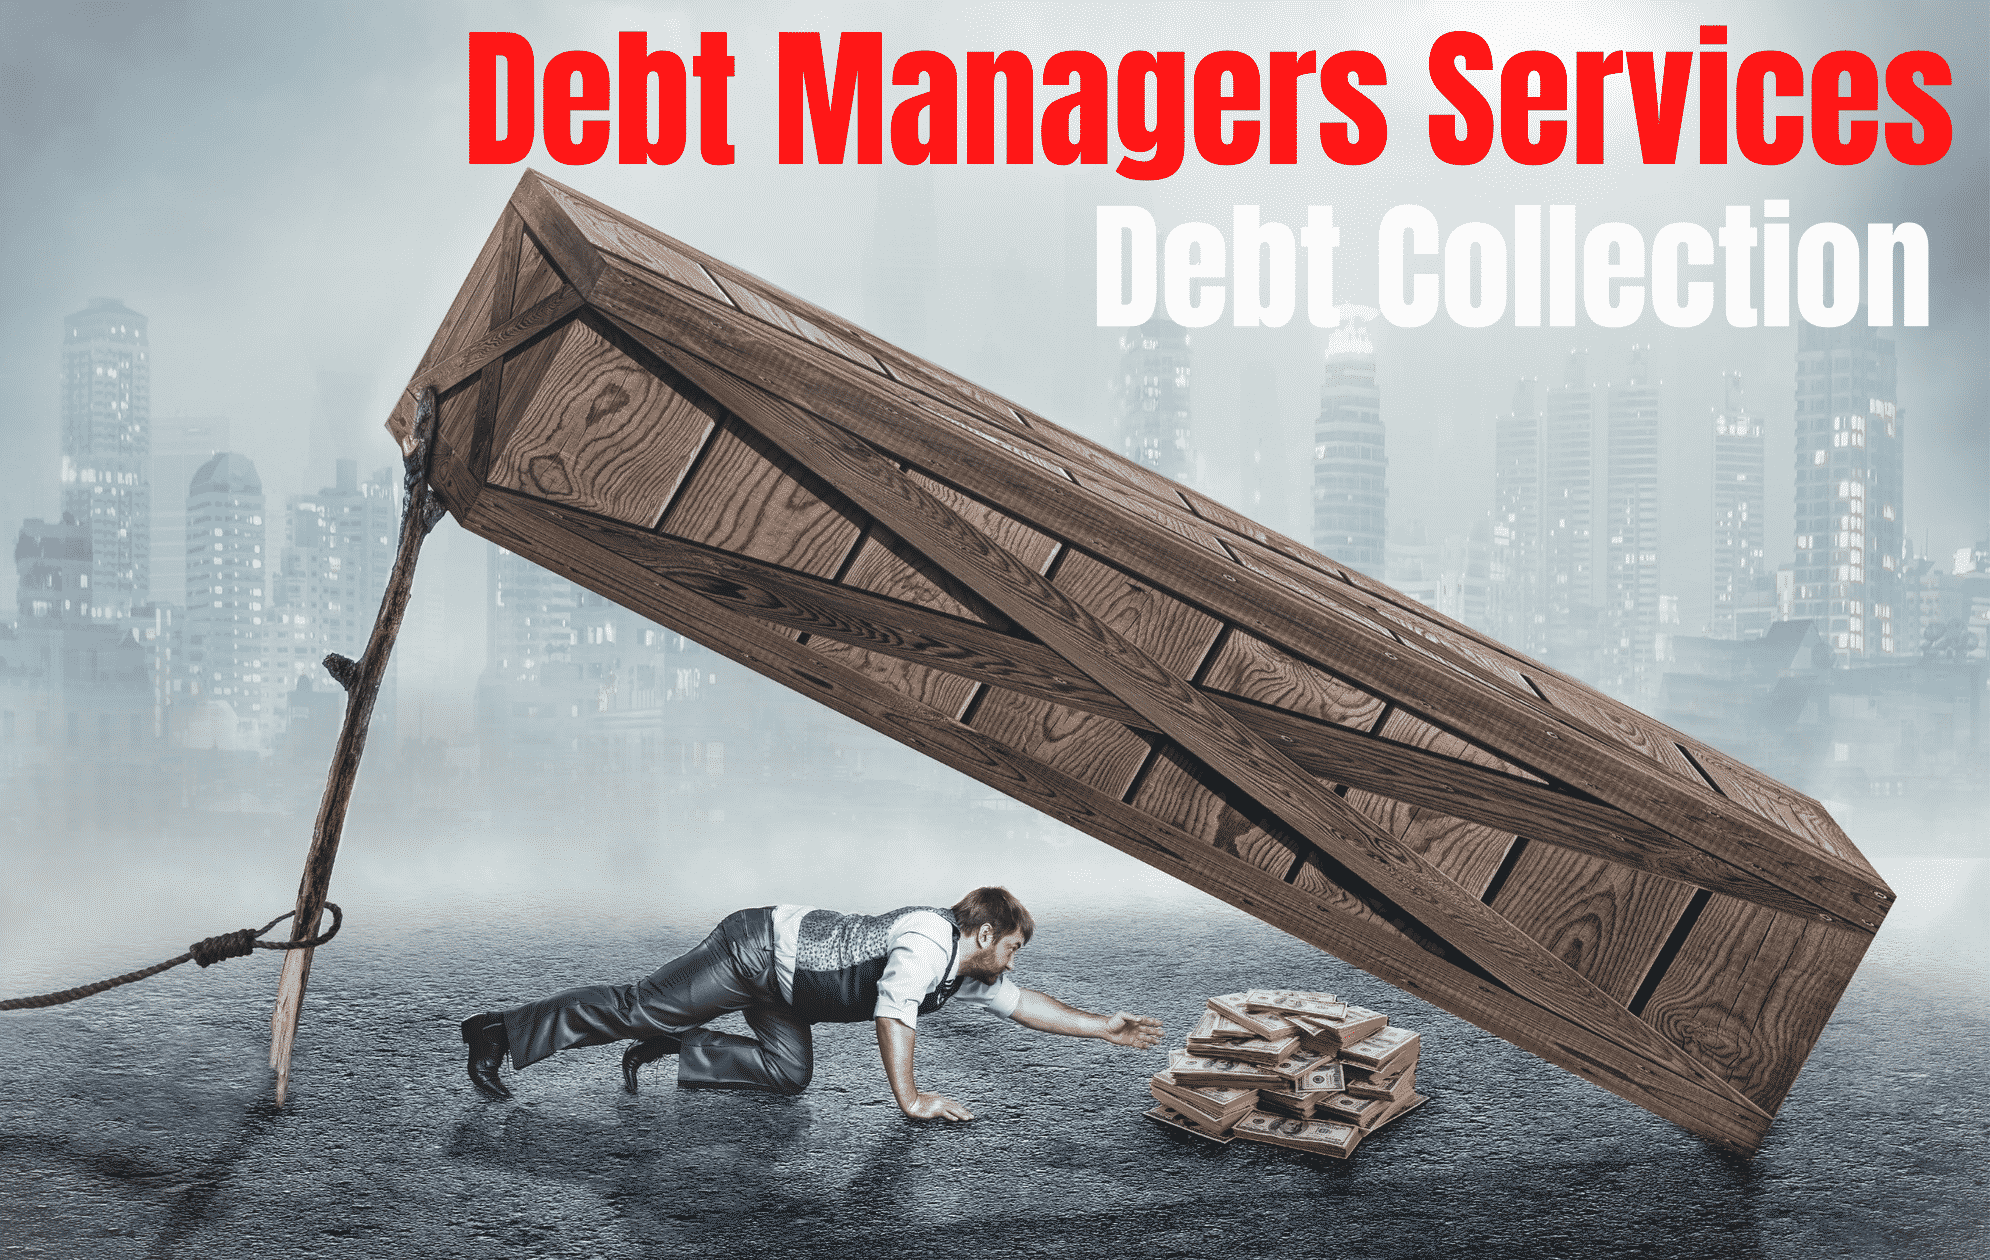 debt-managers-services-limited-debt-collection